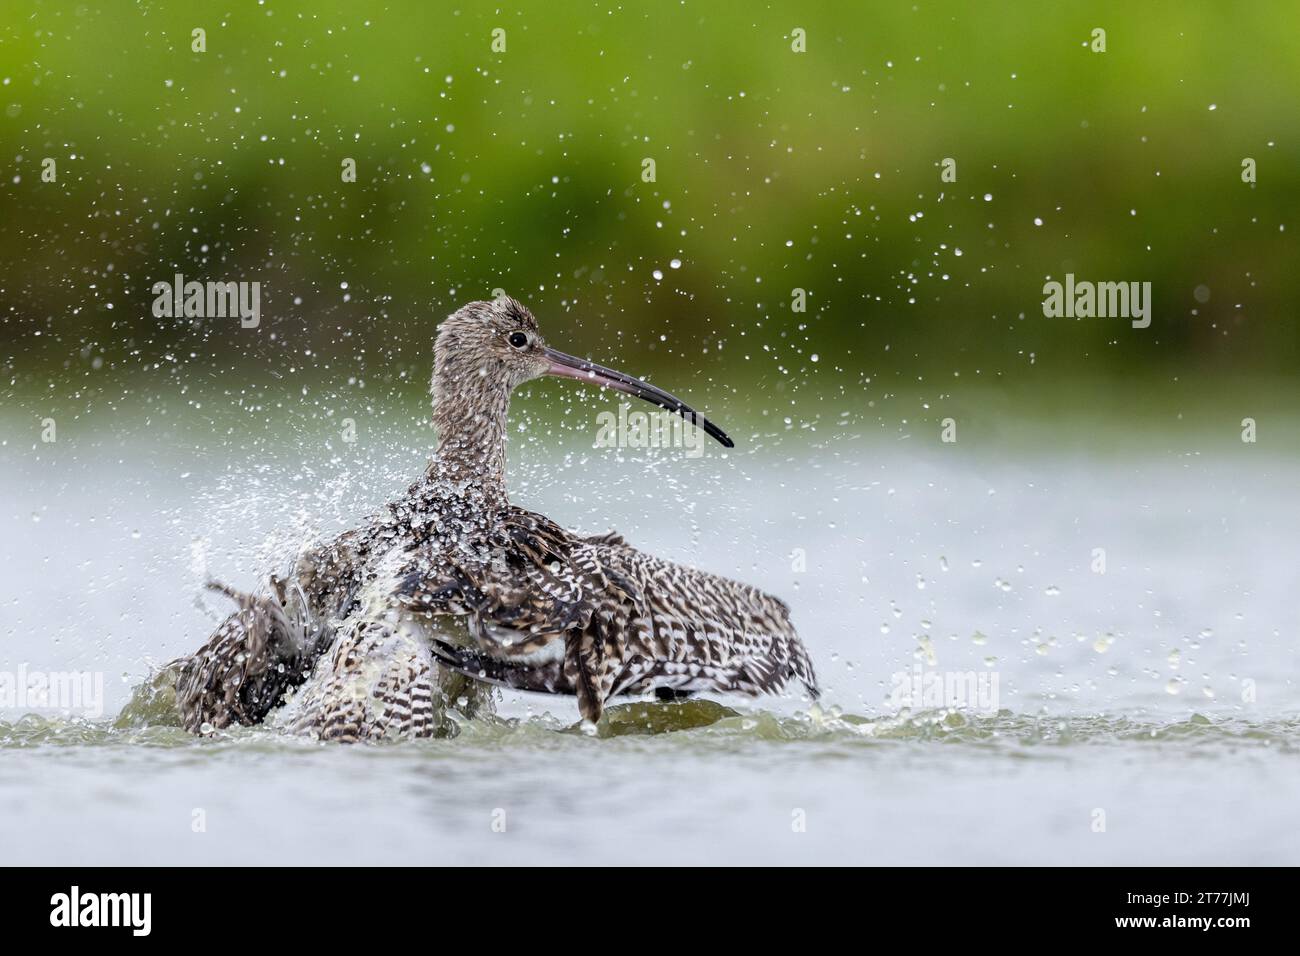 western curlew, Eurasian curlew, common curlew (Numenius arquata), bathing in shallow water, rear view, Netherlands, Frisia, Bolsward Stock Photo